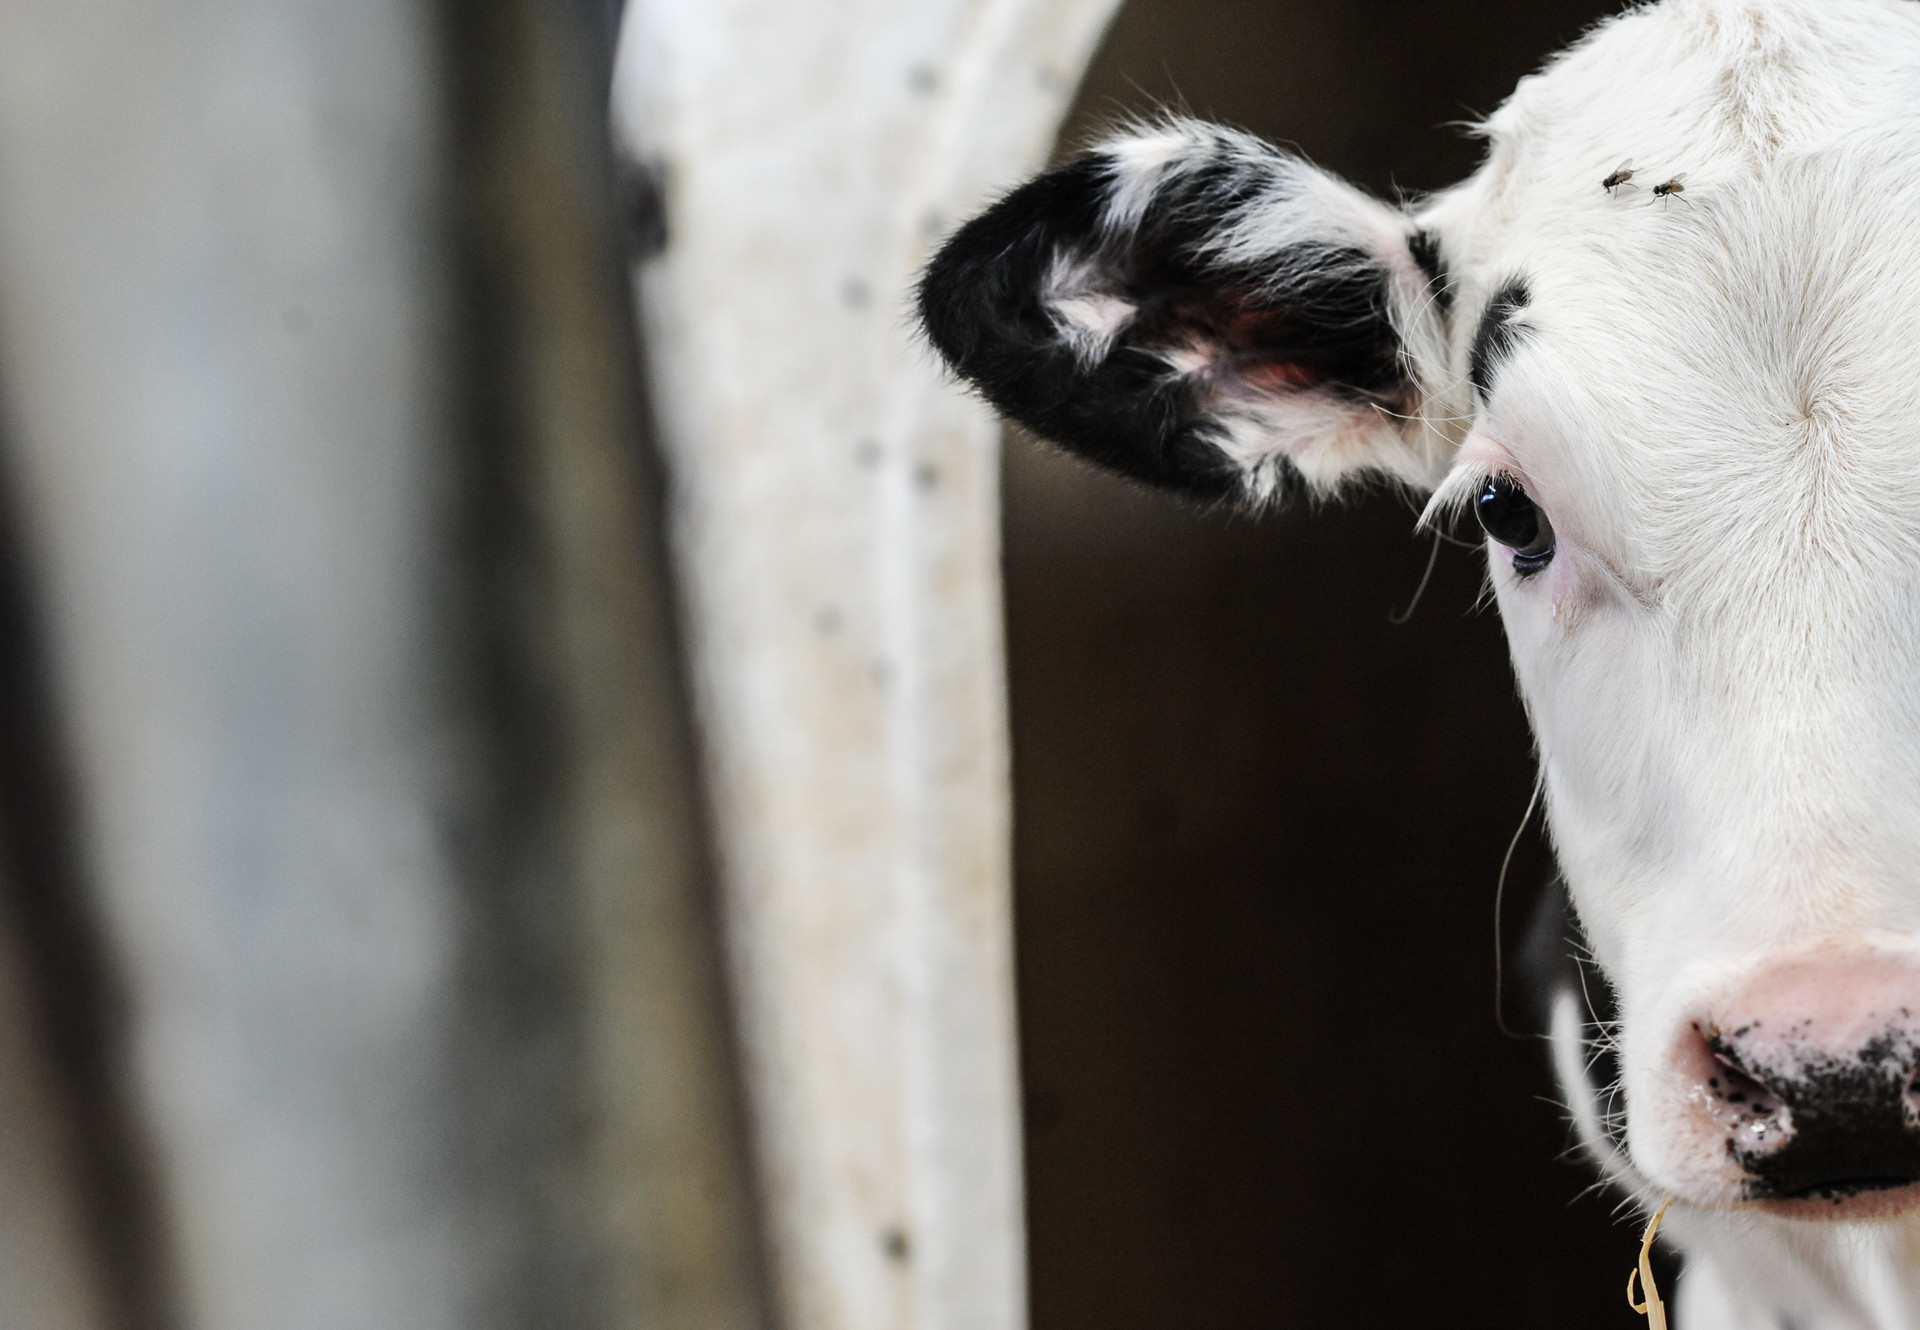 The Suffering of Calves - FOUR PAWS Australia - Animal Welfare Charity